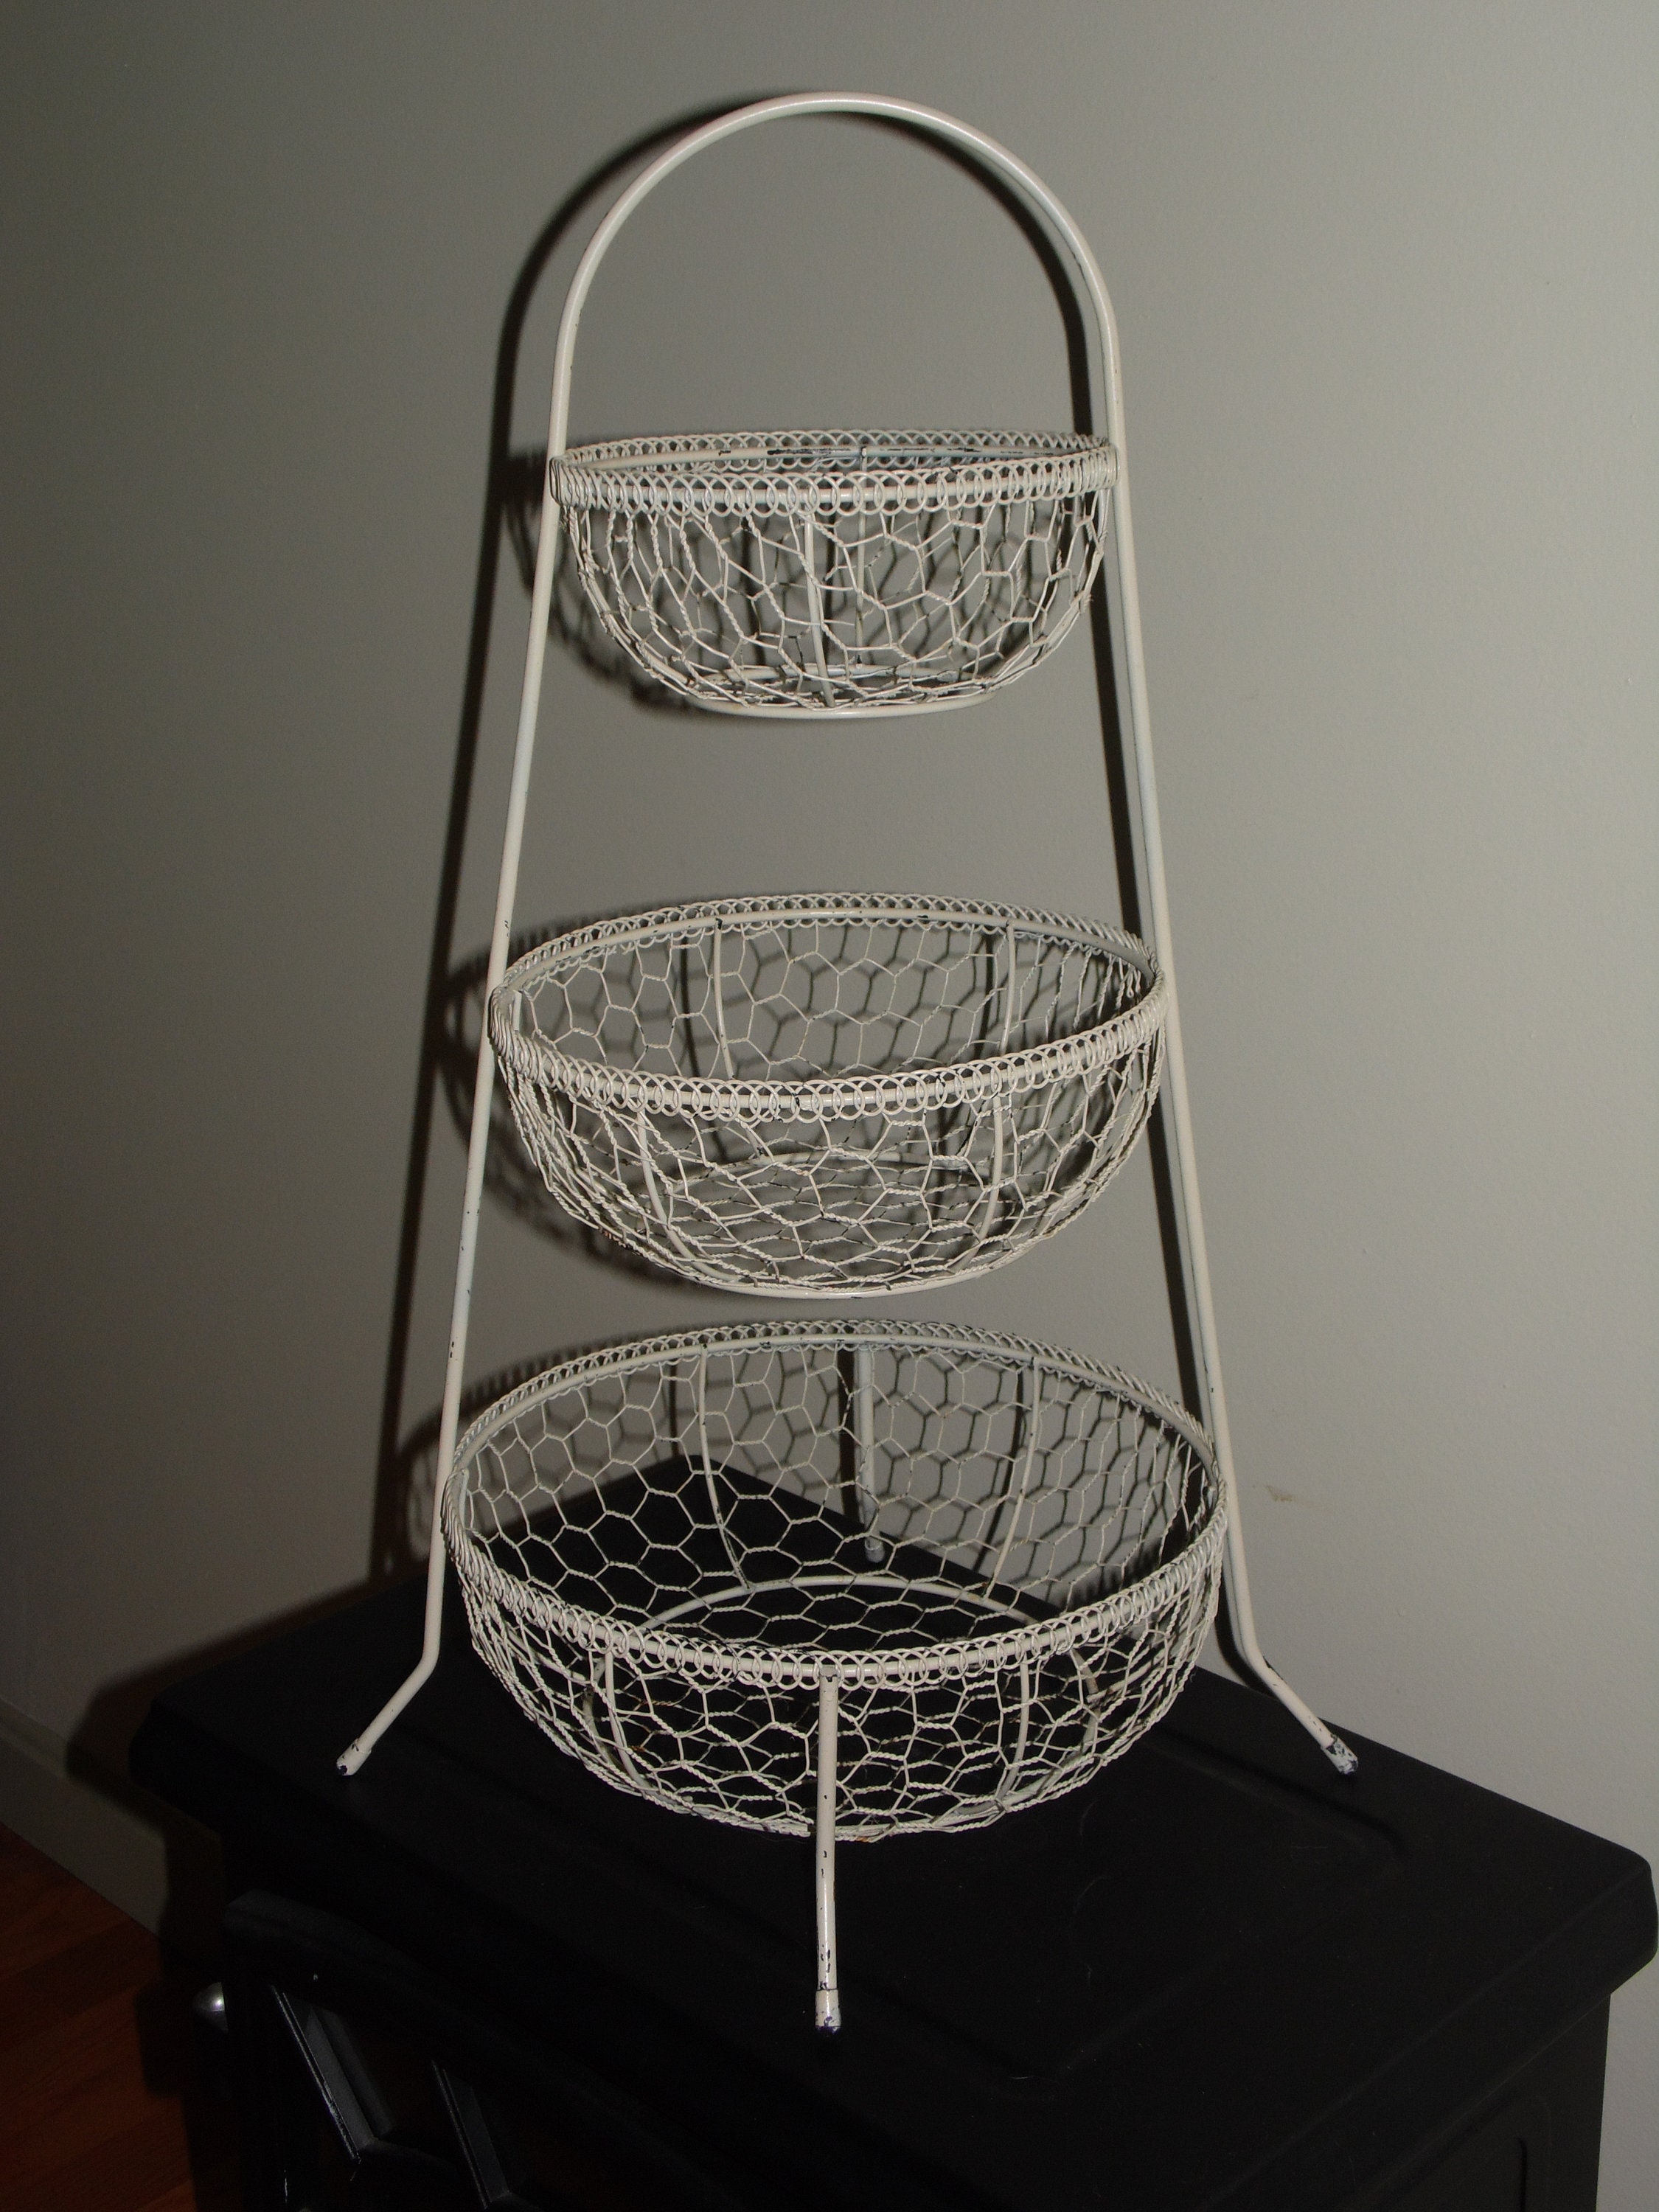 WIRE ETAGER WITH 3 BASKETS